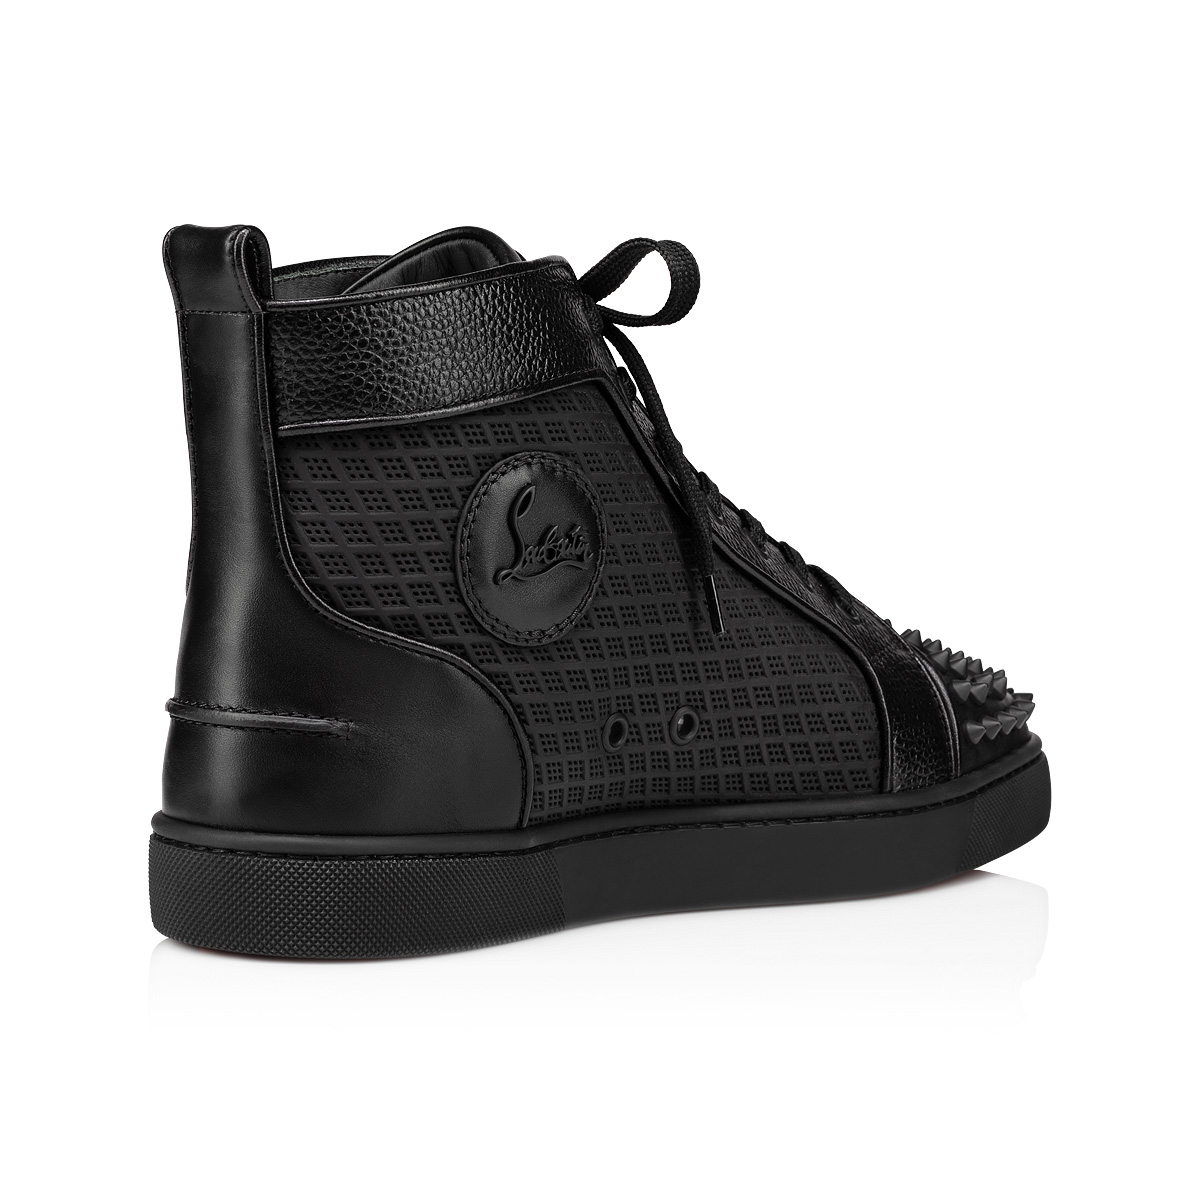 Lou Spikes - High-top sneakers - Calf leather and spikes - Black - Christian  Louboutin